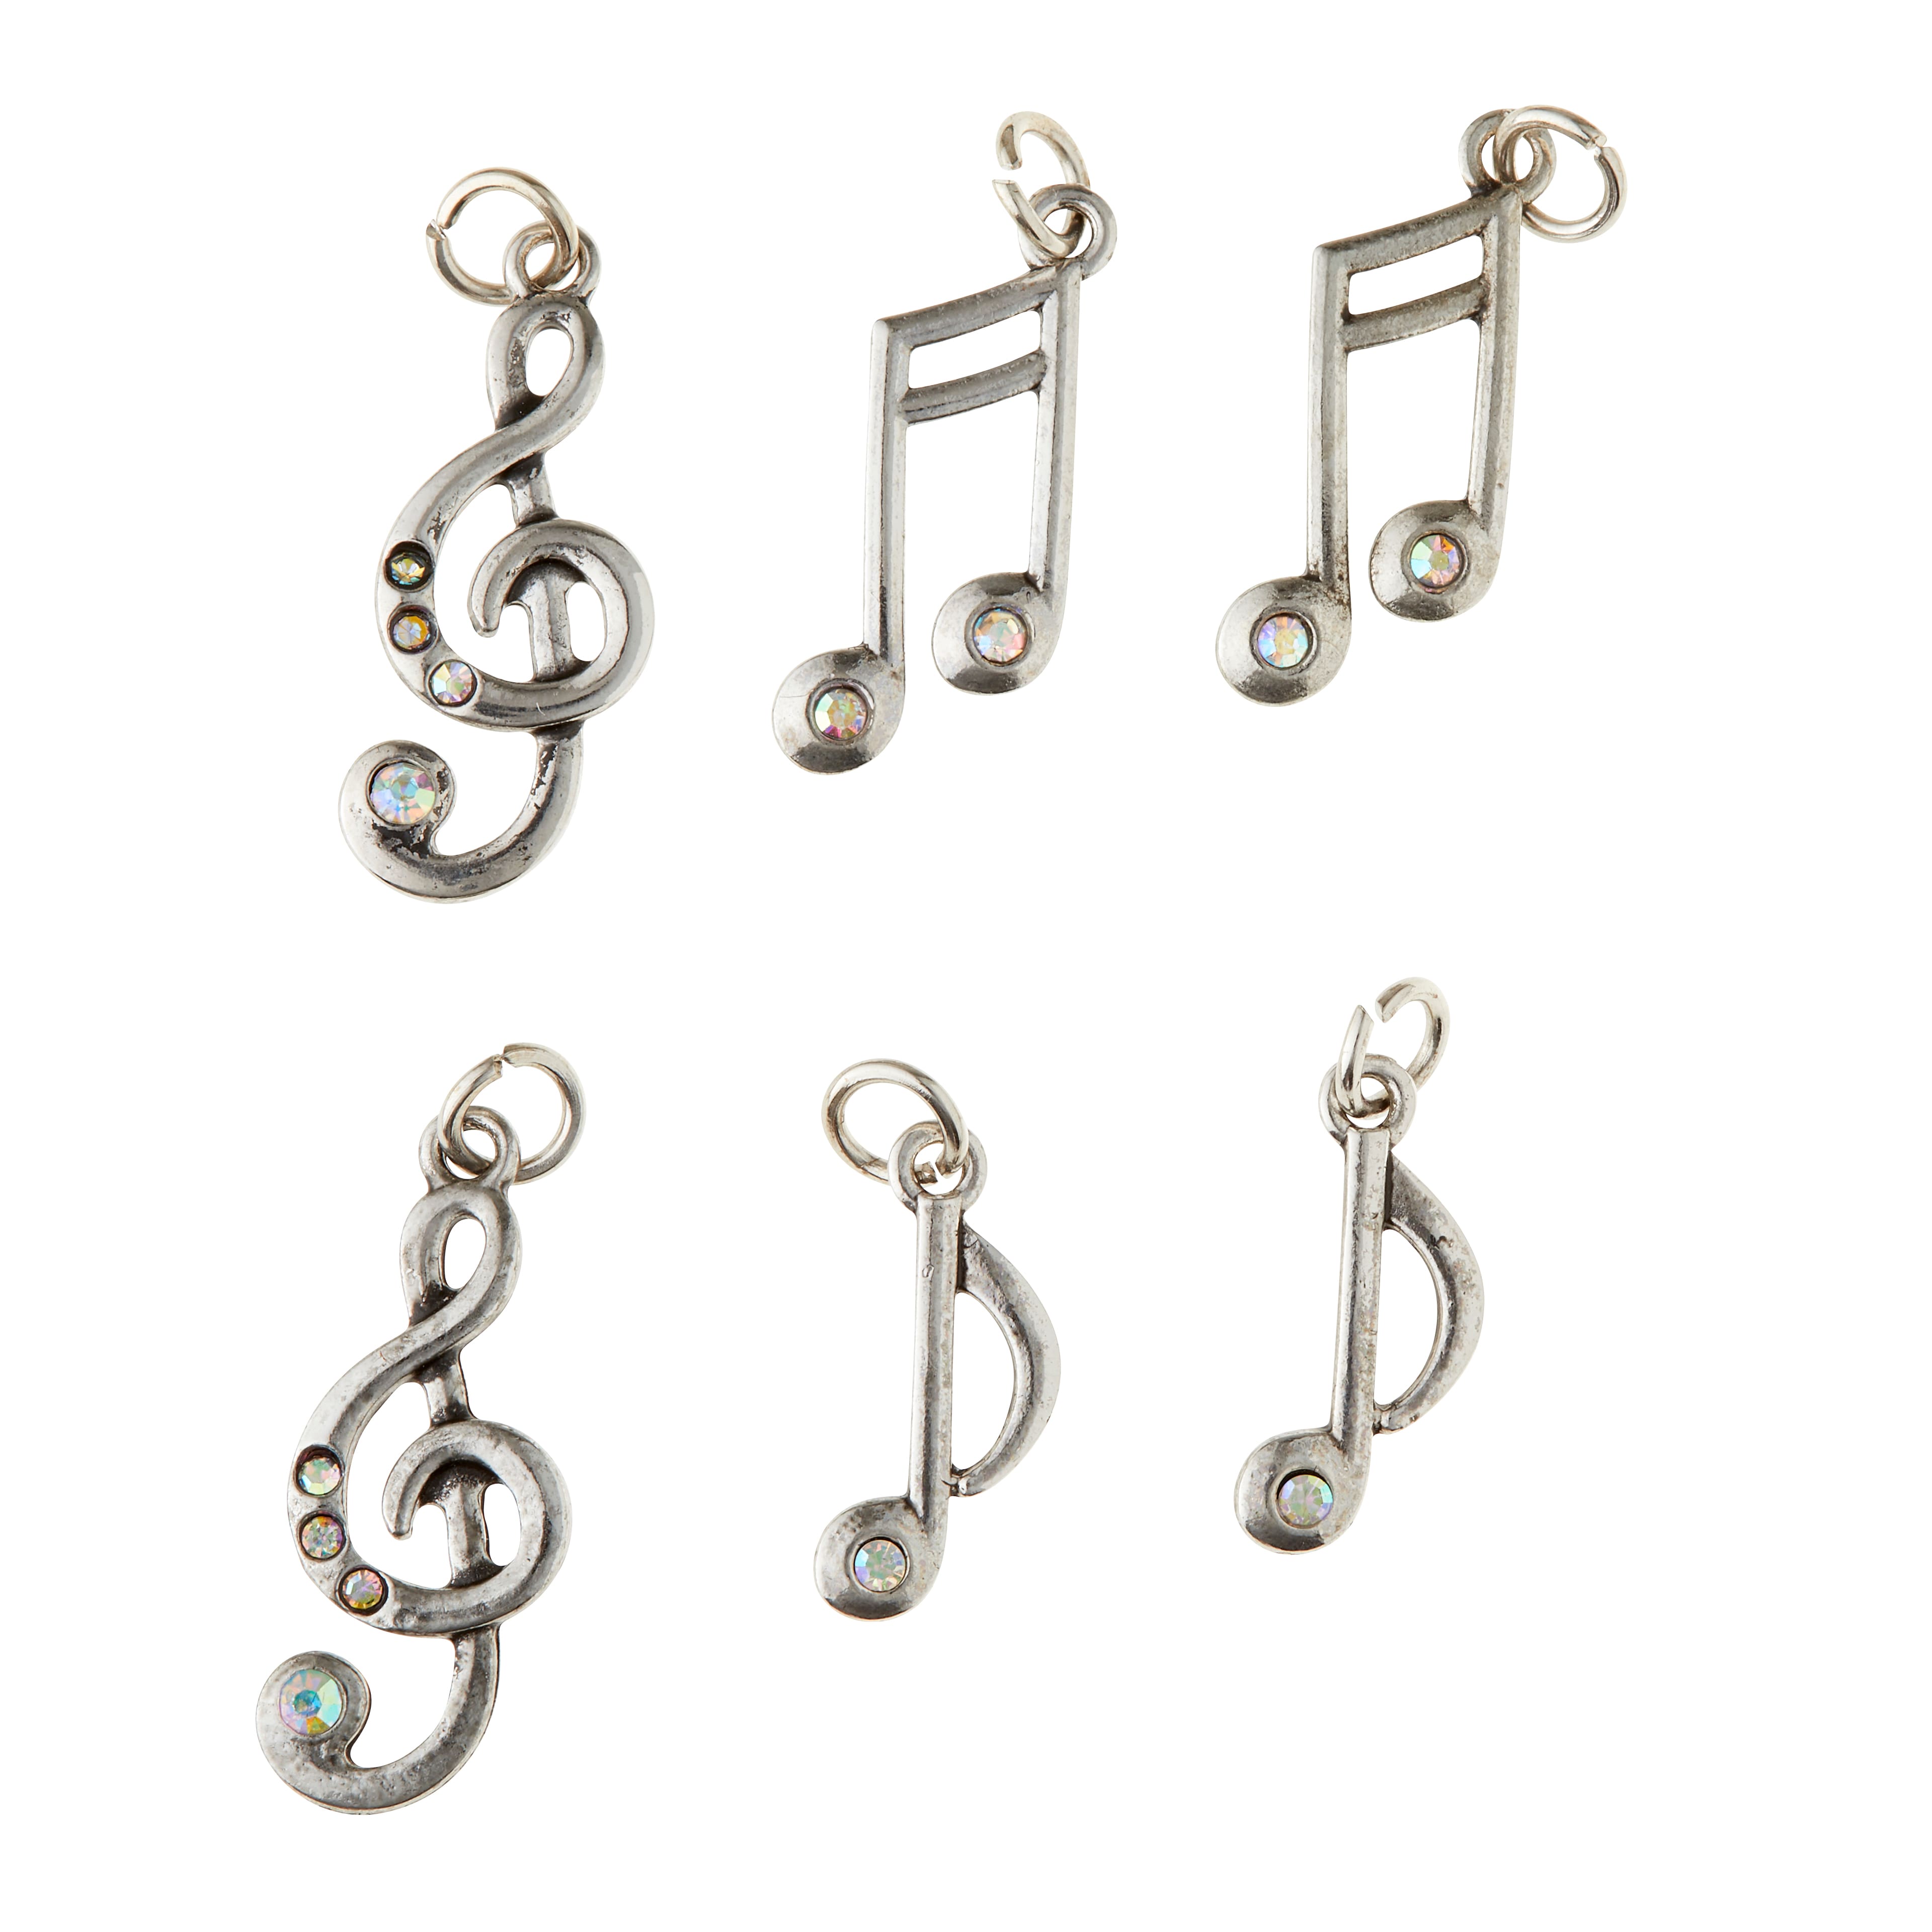  Clip On Charms Zipper Pulls Music Note, Musical Notes